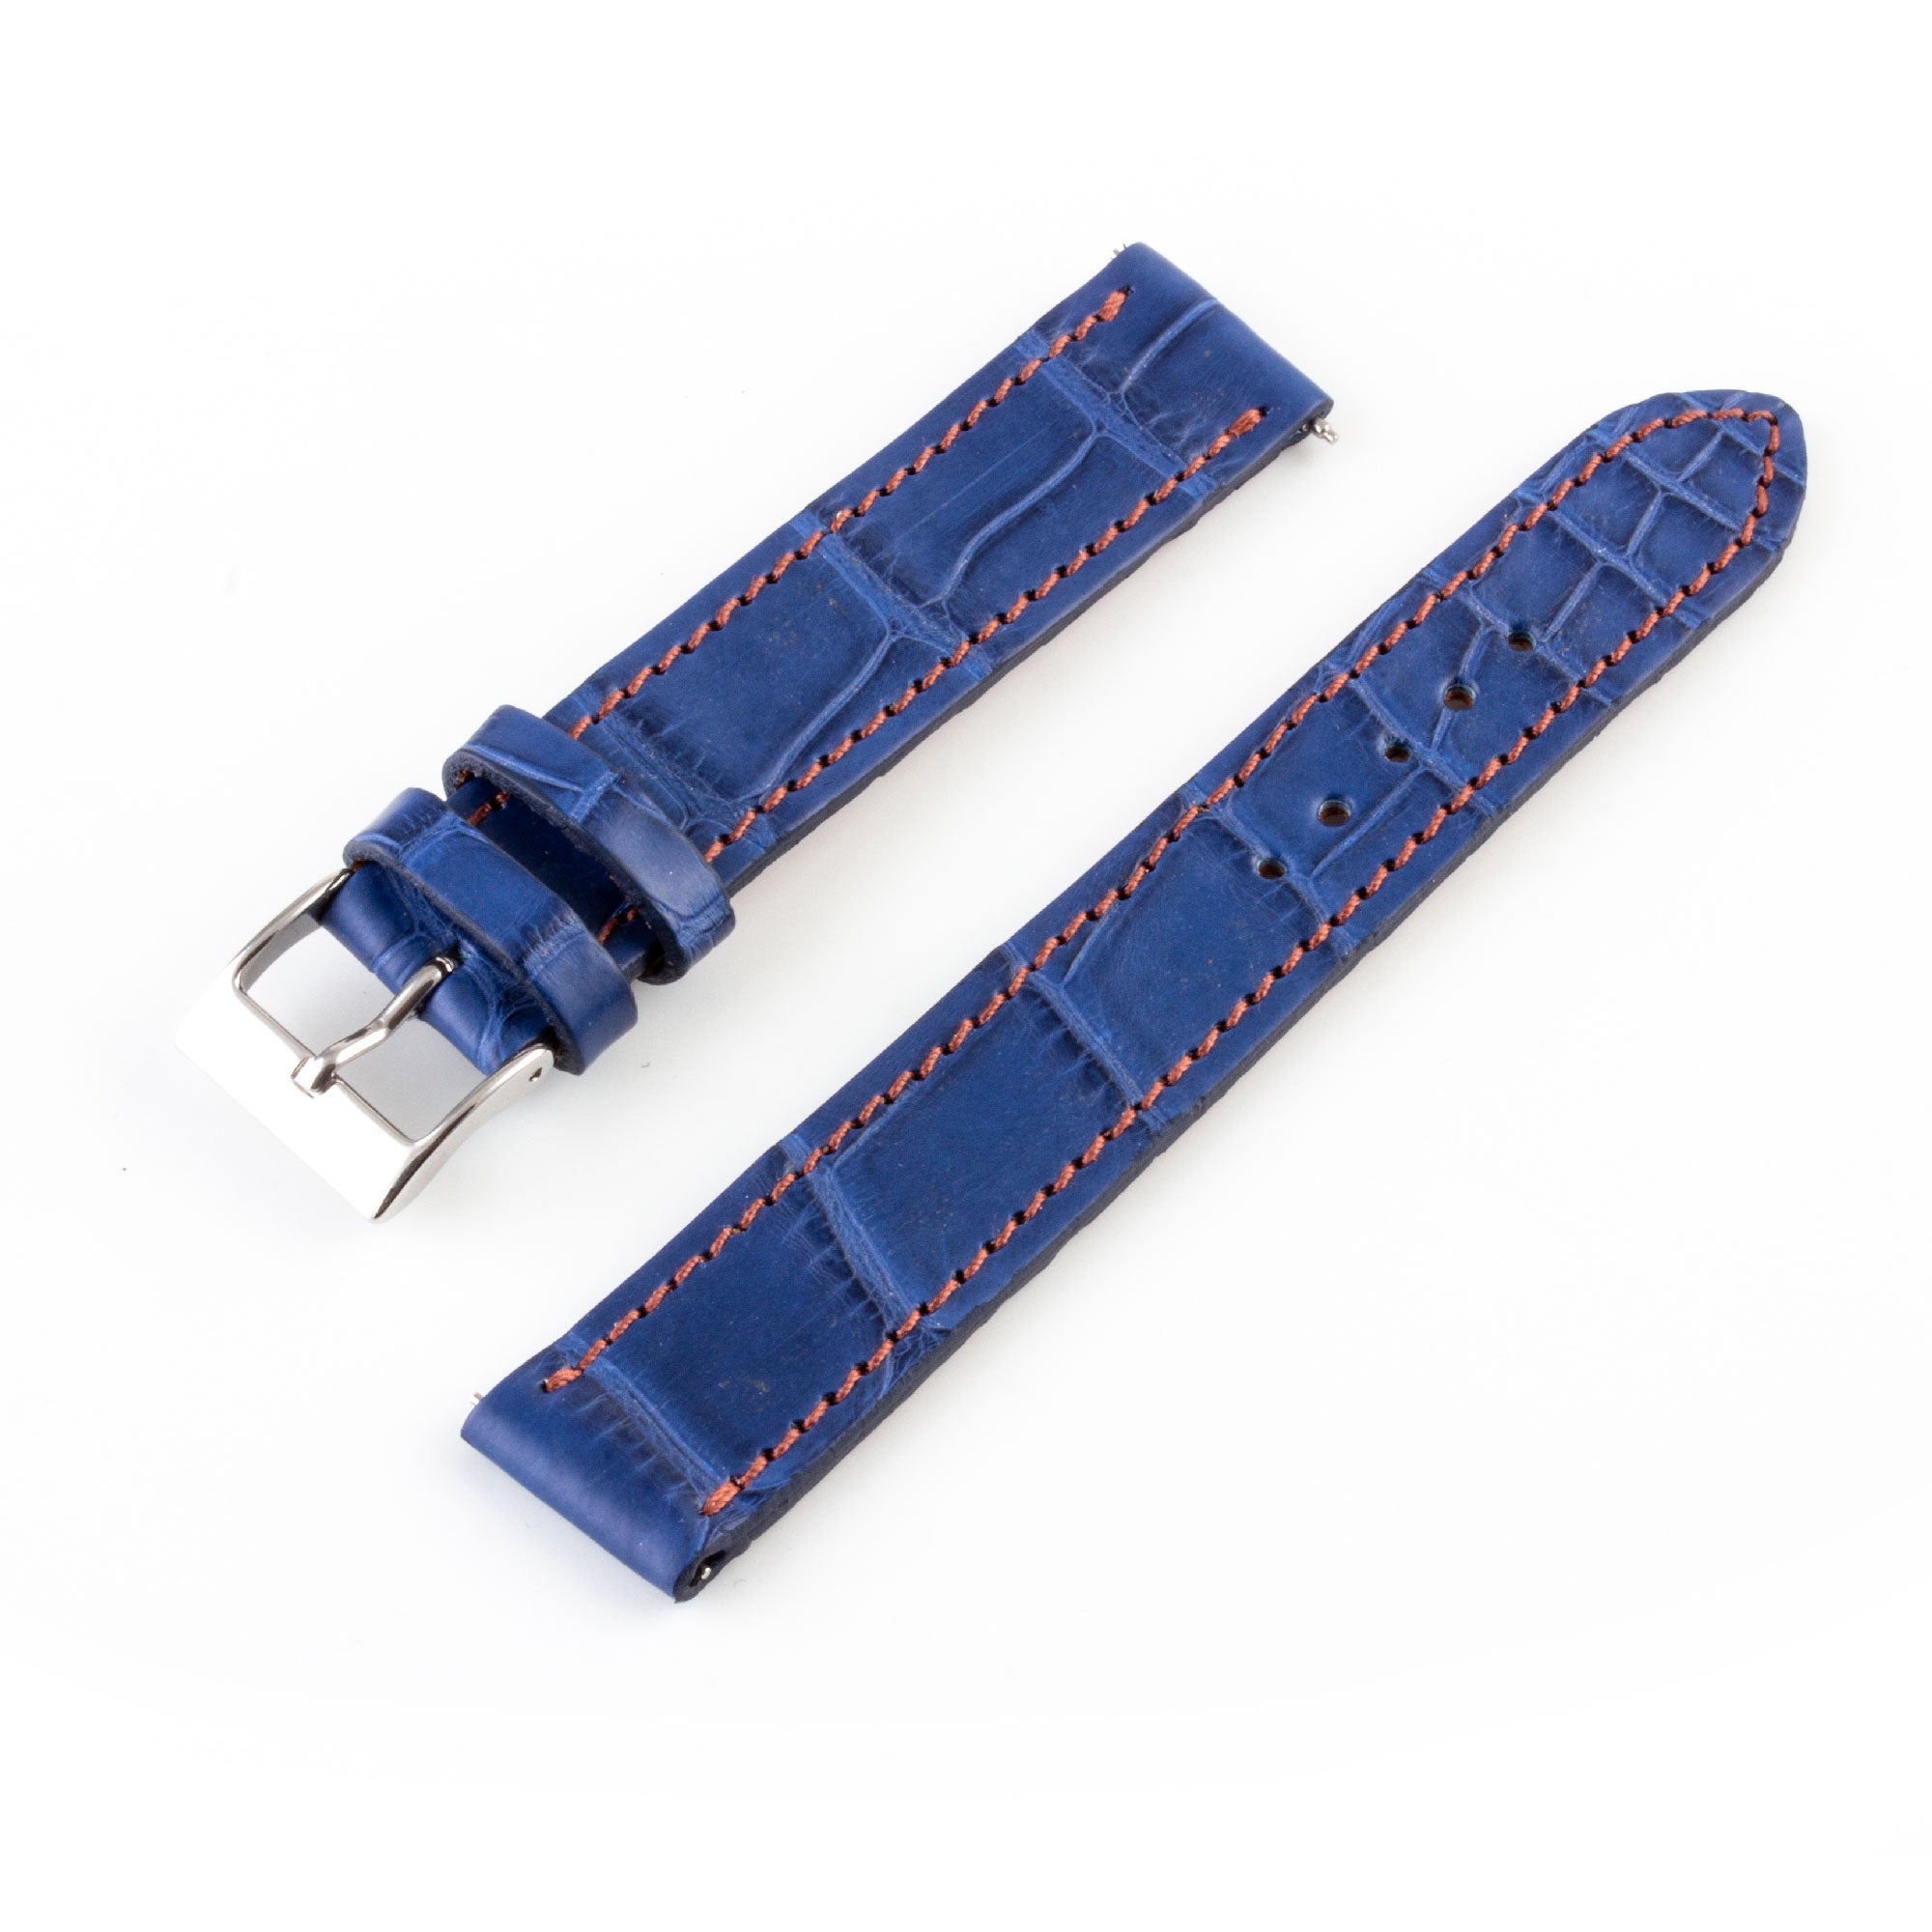 Alligator "Solo" leather watch band - 17mm width (0.67 inches) / Size M (n° 1)